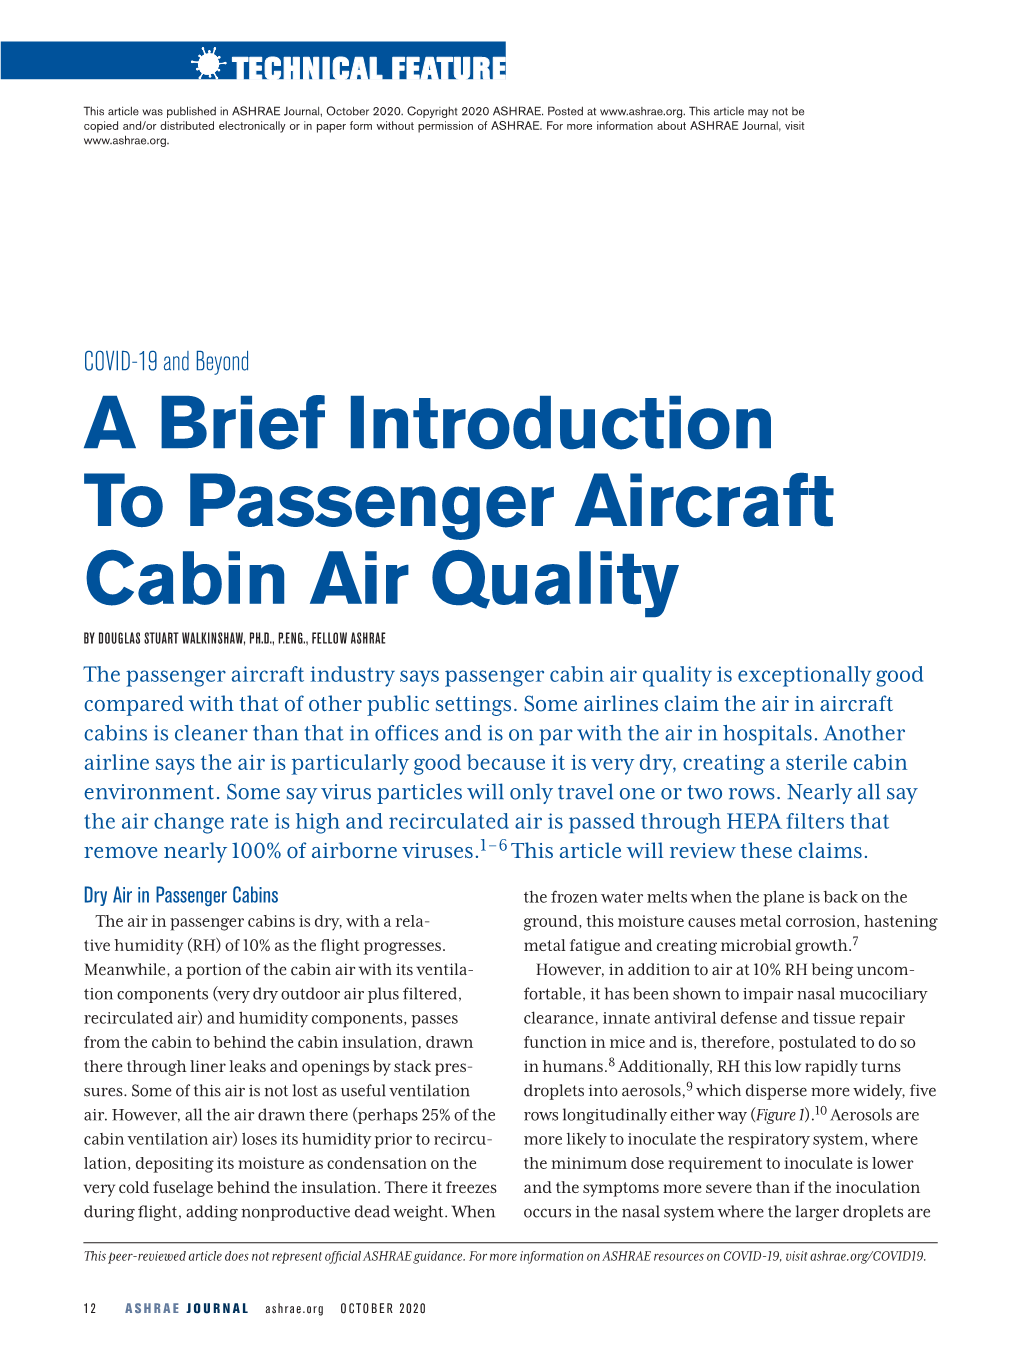 A Brief Introduction to Passenger Aircraft Cabin Air Quality